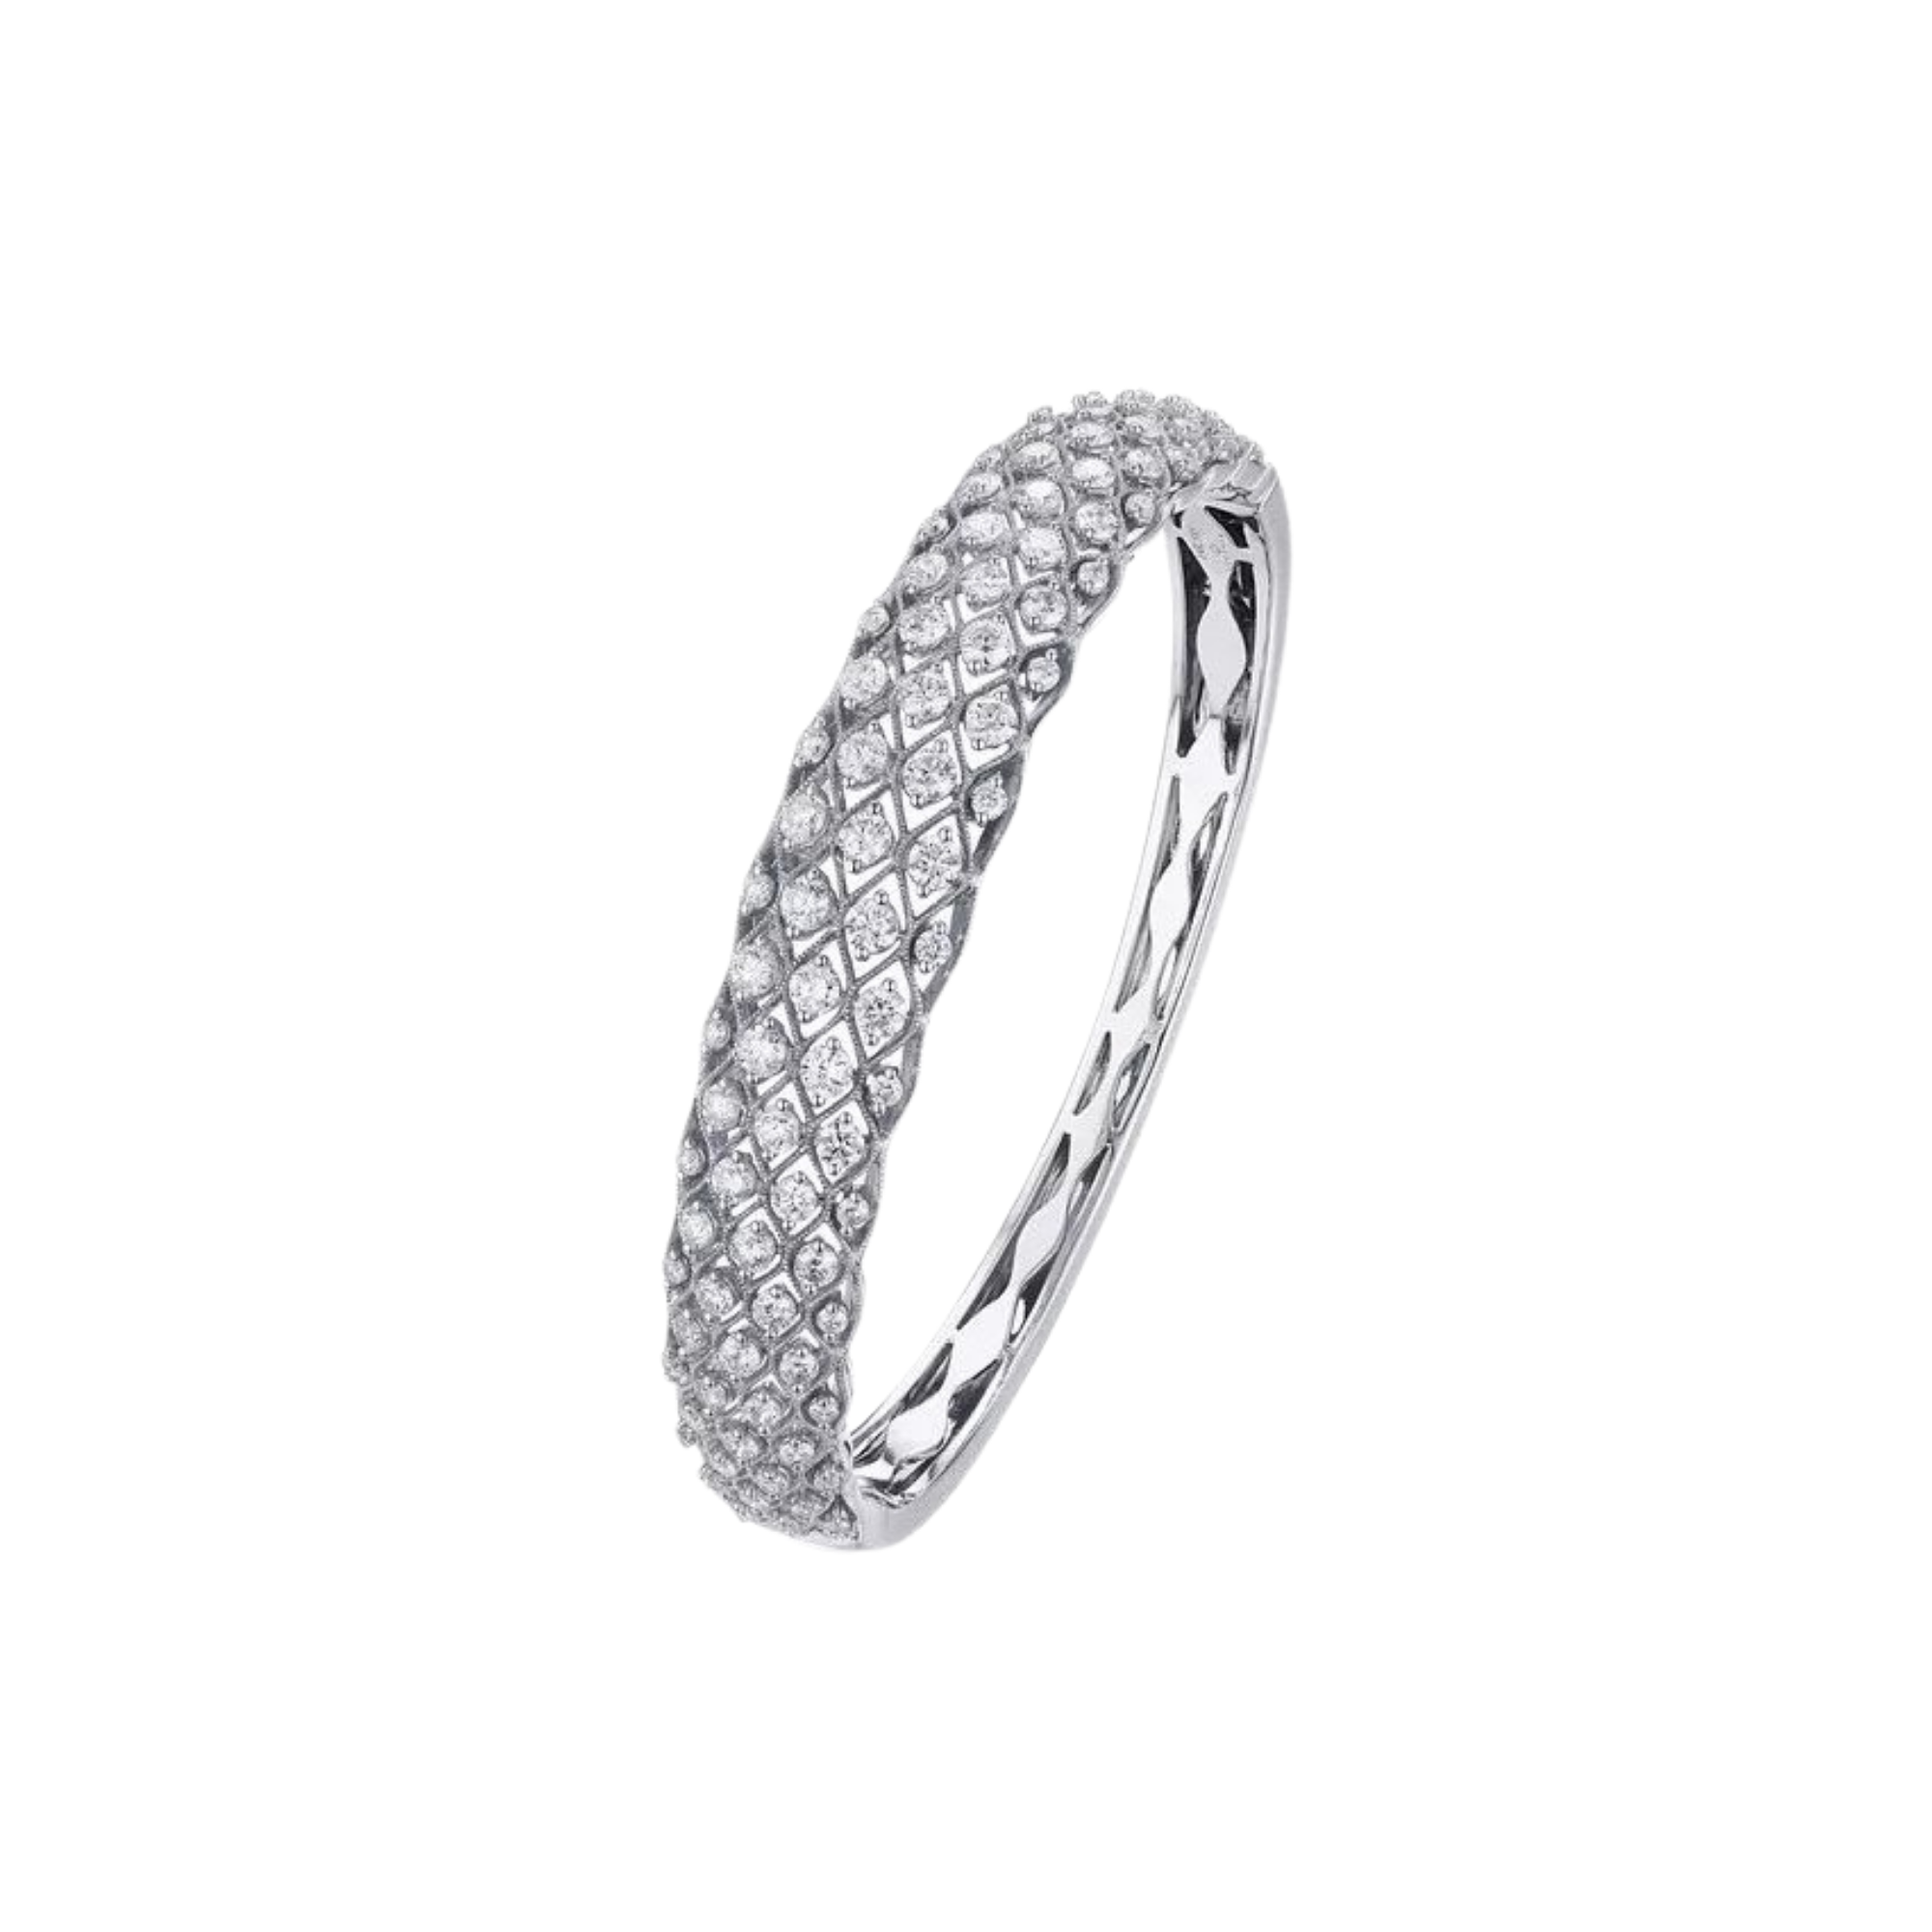 Luvente 14k White Gold and Diamond Bangle, price upon request